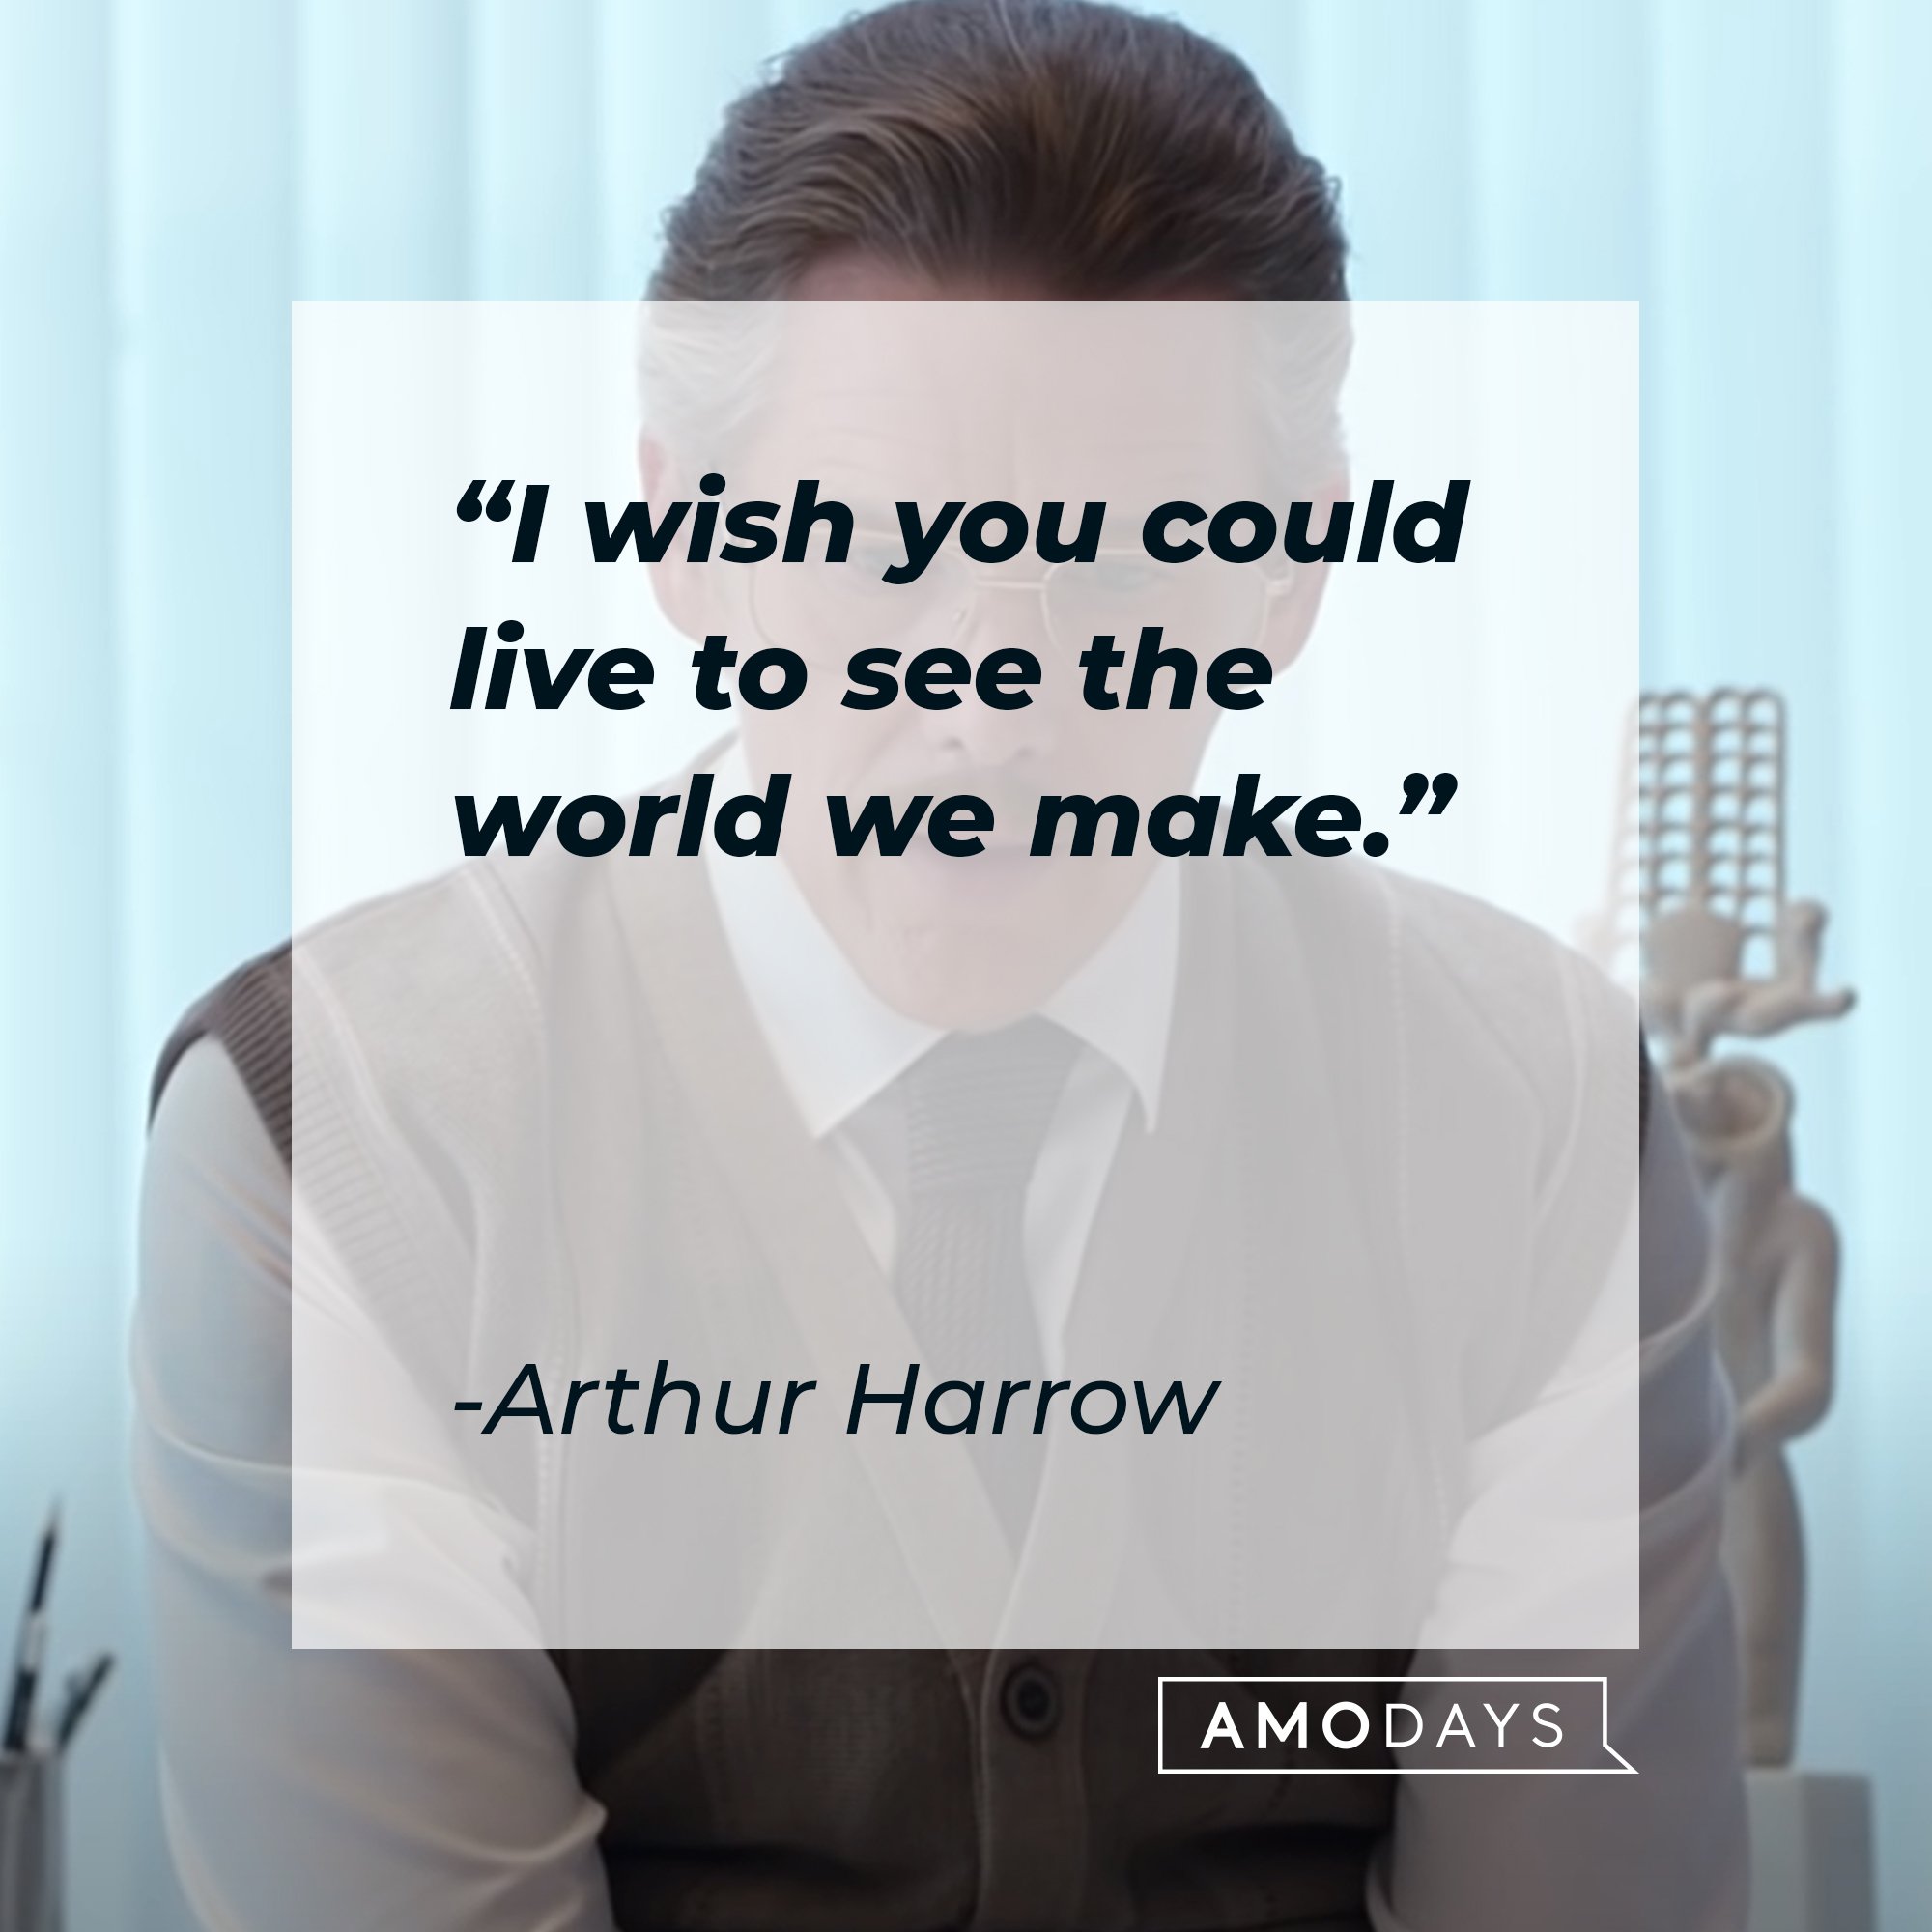 Arthur Harrow’s quote: "I wish you could live to see the world we make." | Image: AmoDays